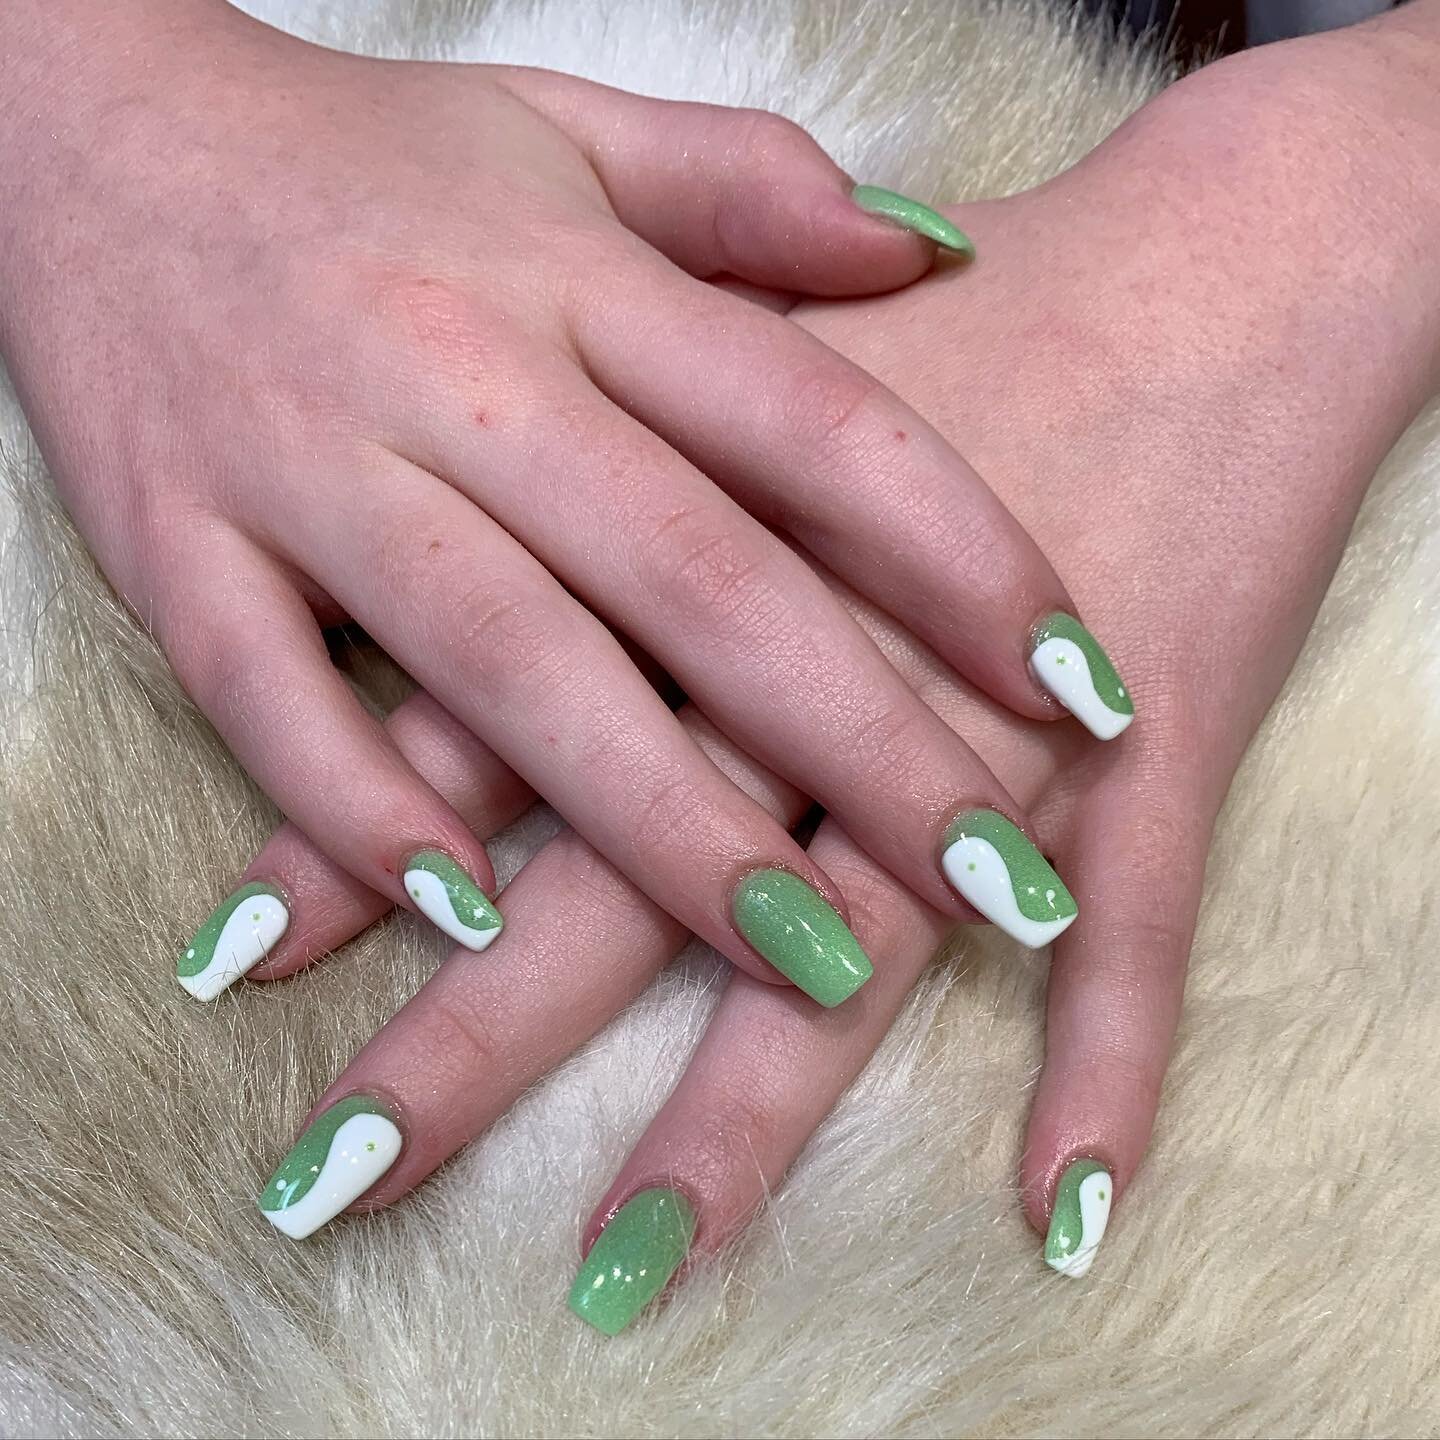 Looking forward to a zenful weekend☯️💚⚪️

#nails #nailart #nailsofinstagram #austin #texas #localbusiness  #local #manicure #nail #beauty #nailsonfleek #nailstagram #nailsoftheday #instanails #nailstyle #nailsart #naildesign #inspire #acrylicnails #